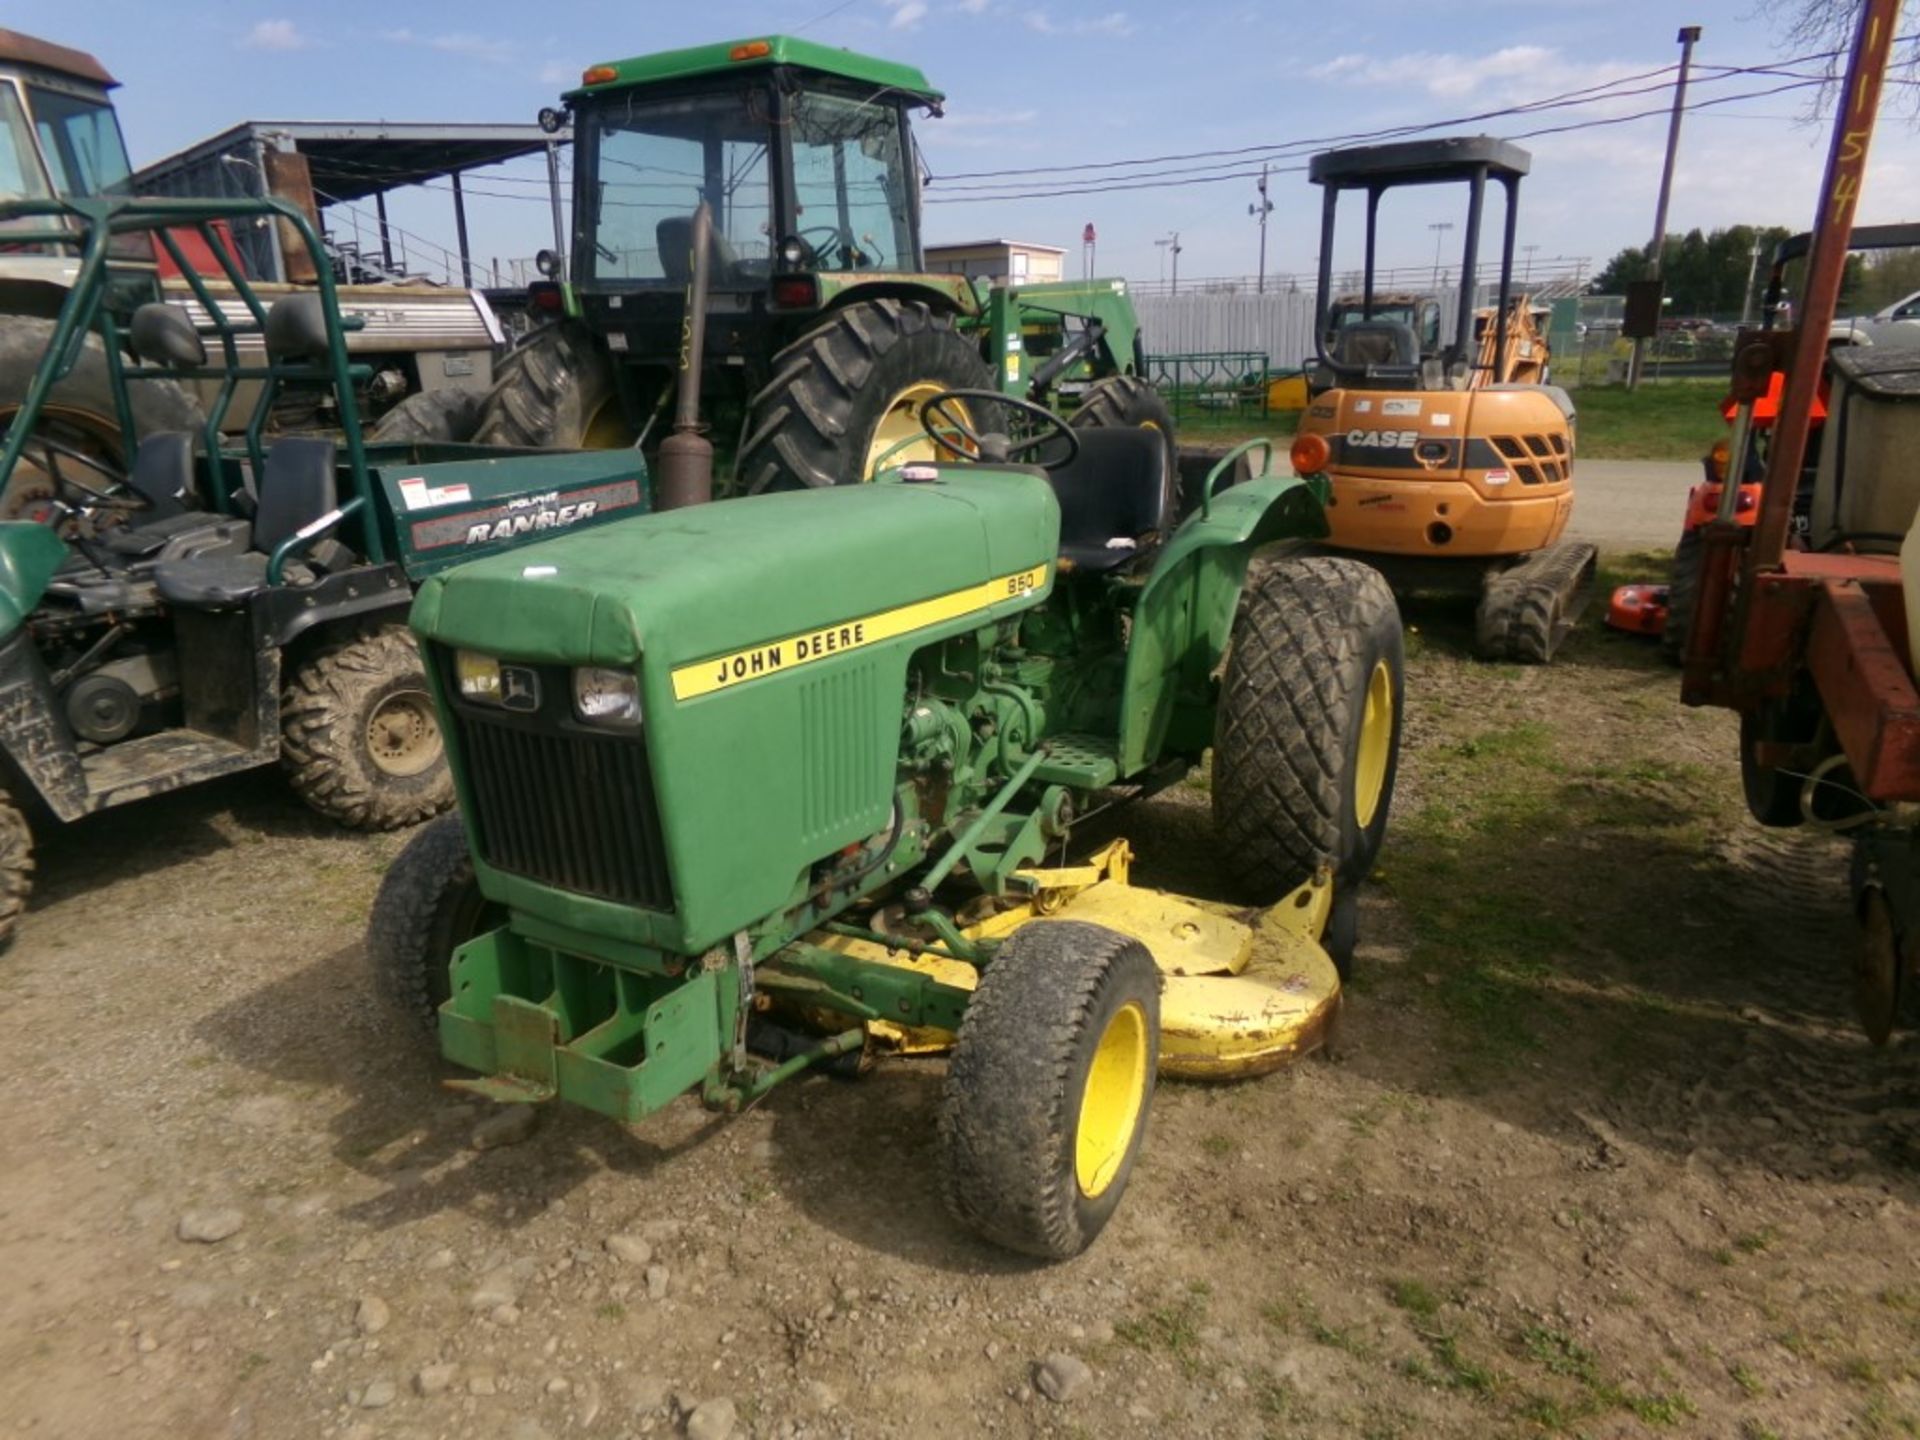 John Deere 850 2 WD Tractor with 72'' Belly Mower, 3970, MISSING 3 PT ARMS (5765)